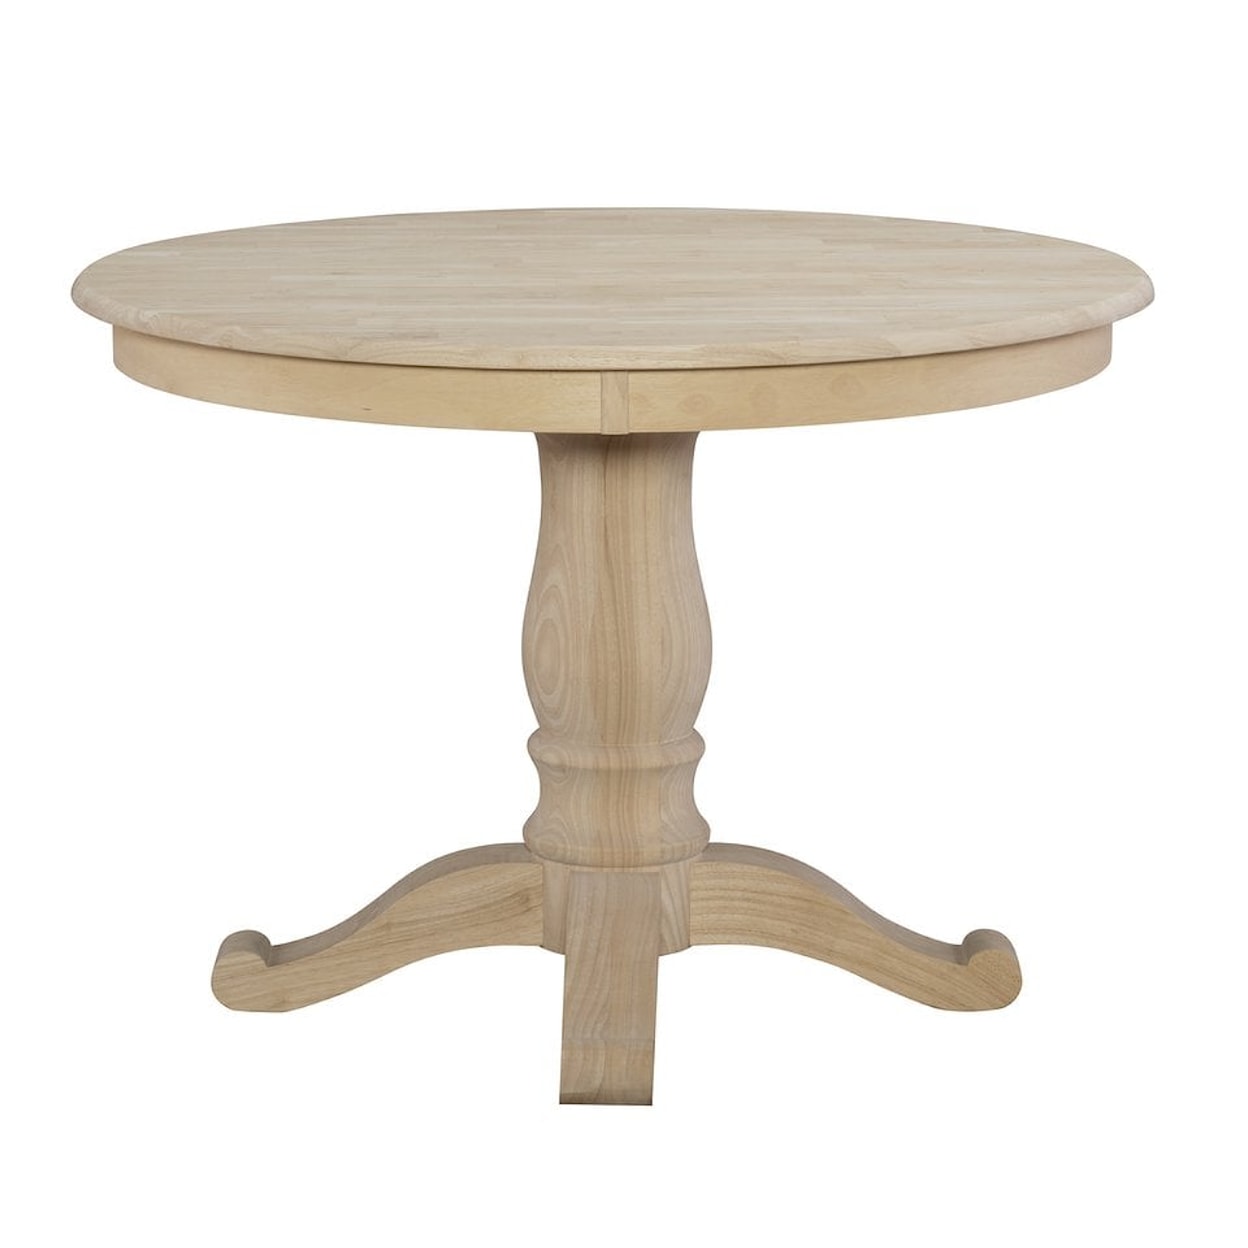 John Thomas SELECT Dining Room Build Your Own 42" D Round Table